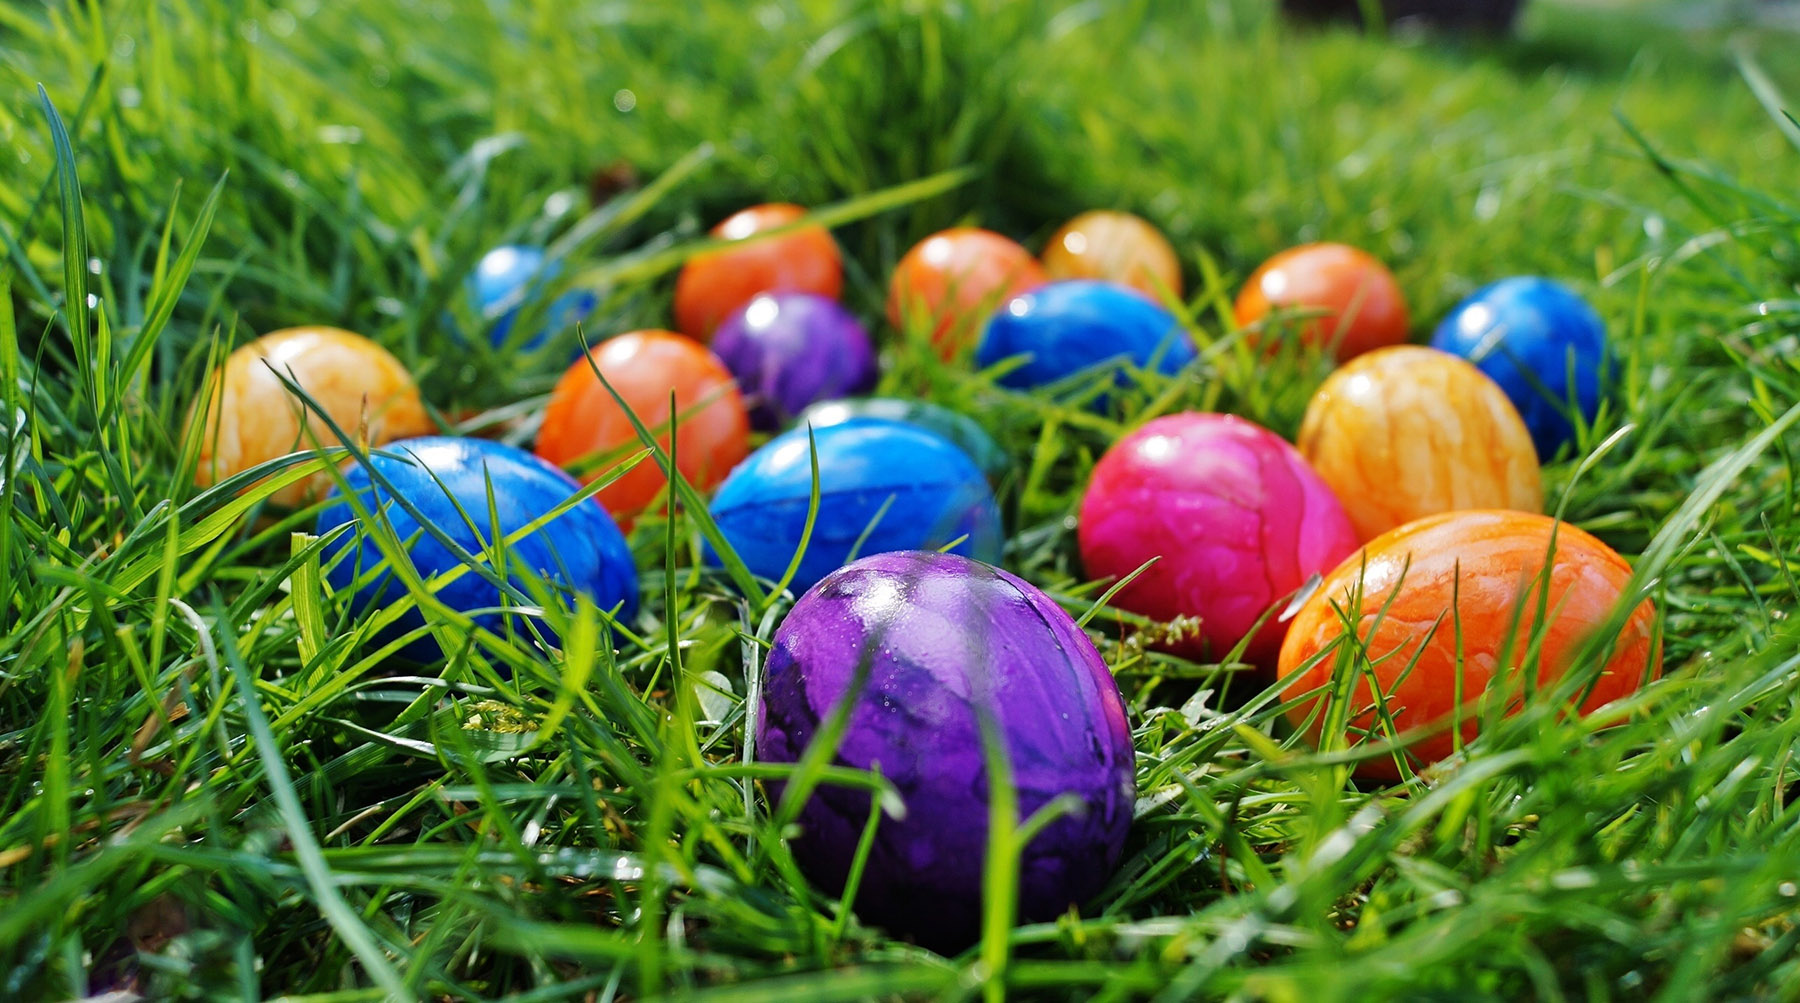 Stock photo of colorful, painted Easter eggs lying in the grass (Creative Commons photo, courtesy of RawPixel.com)